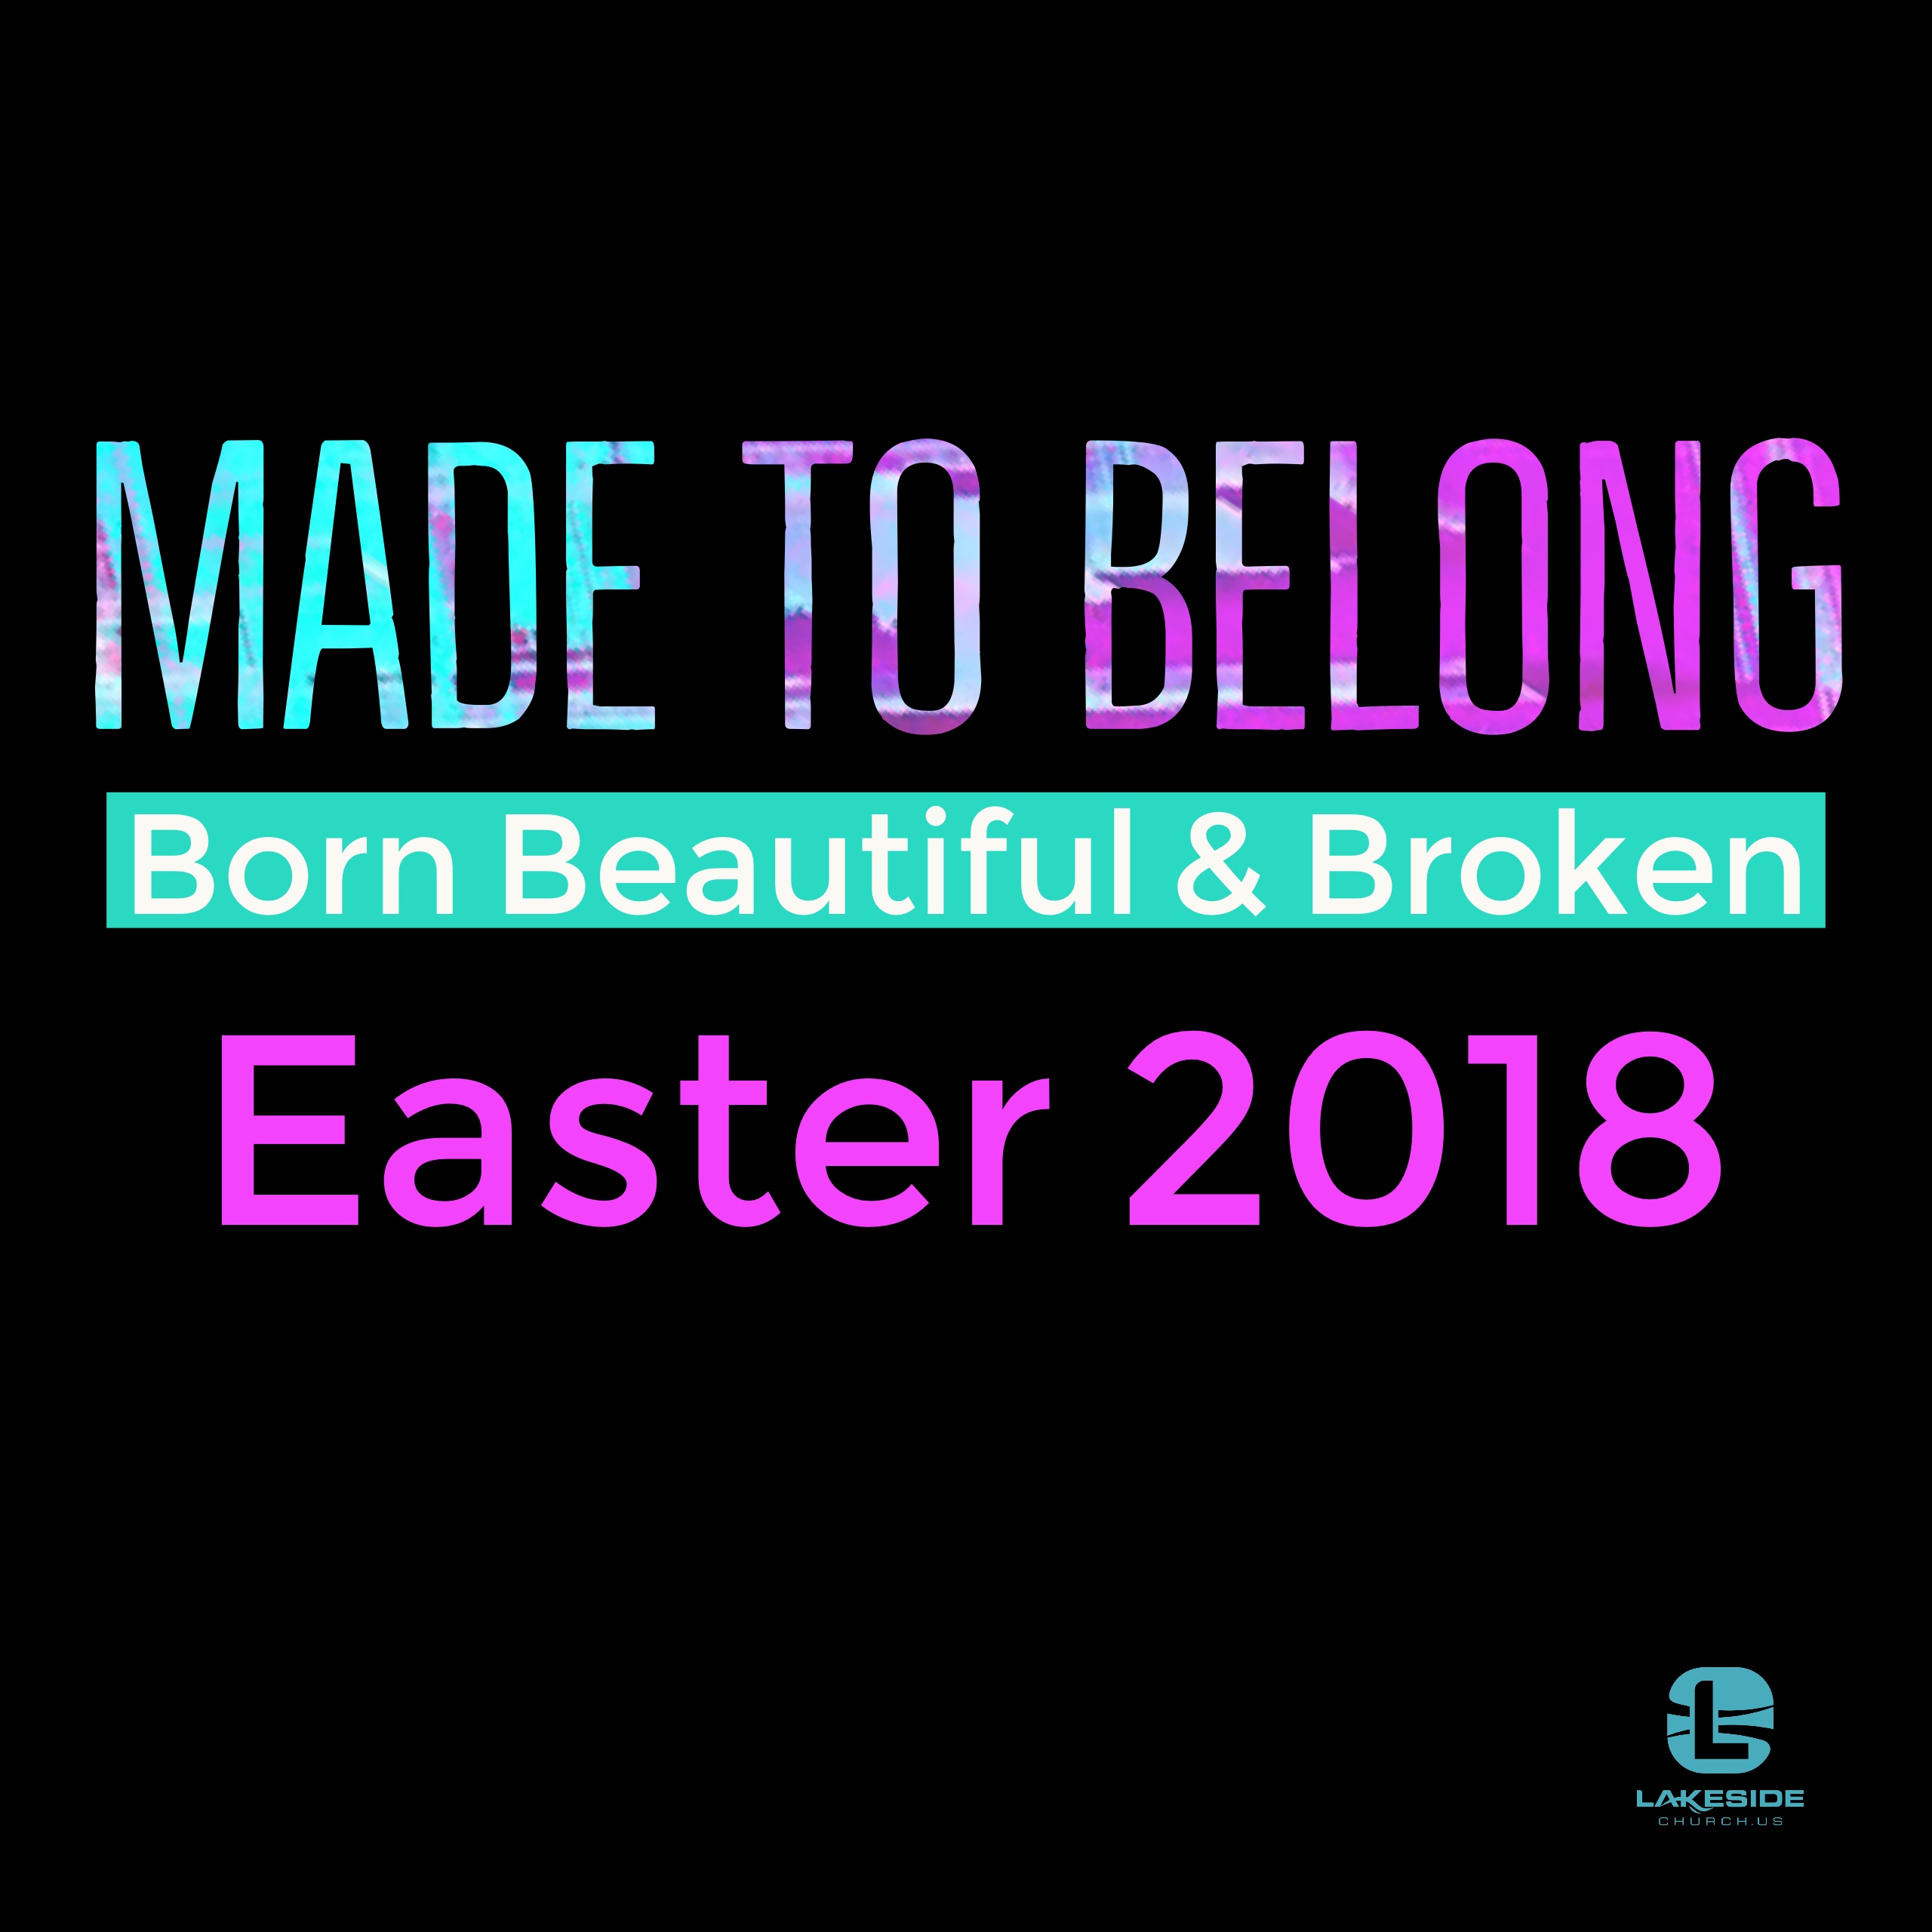 Made to Belong Easter 2018 (4.1.18)